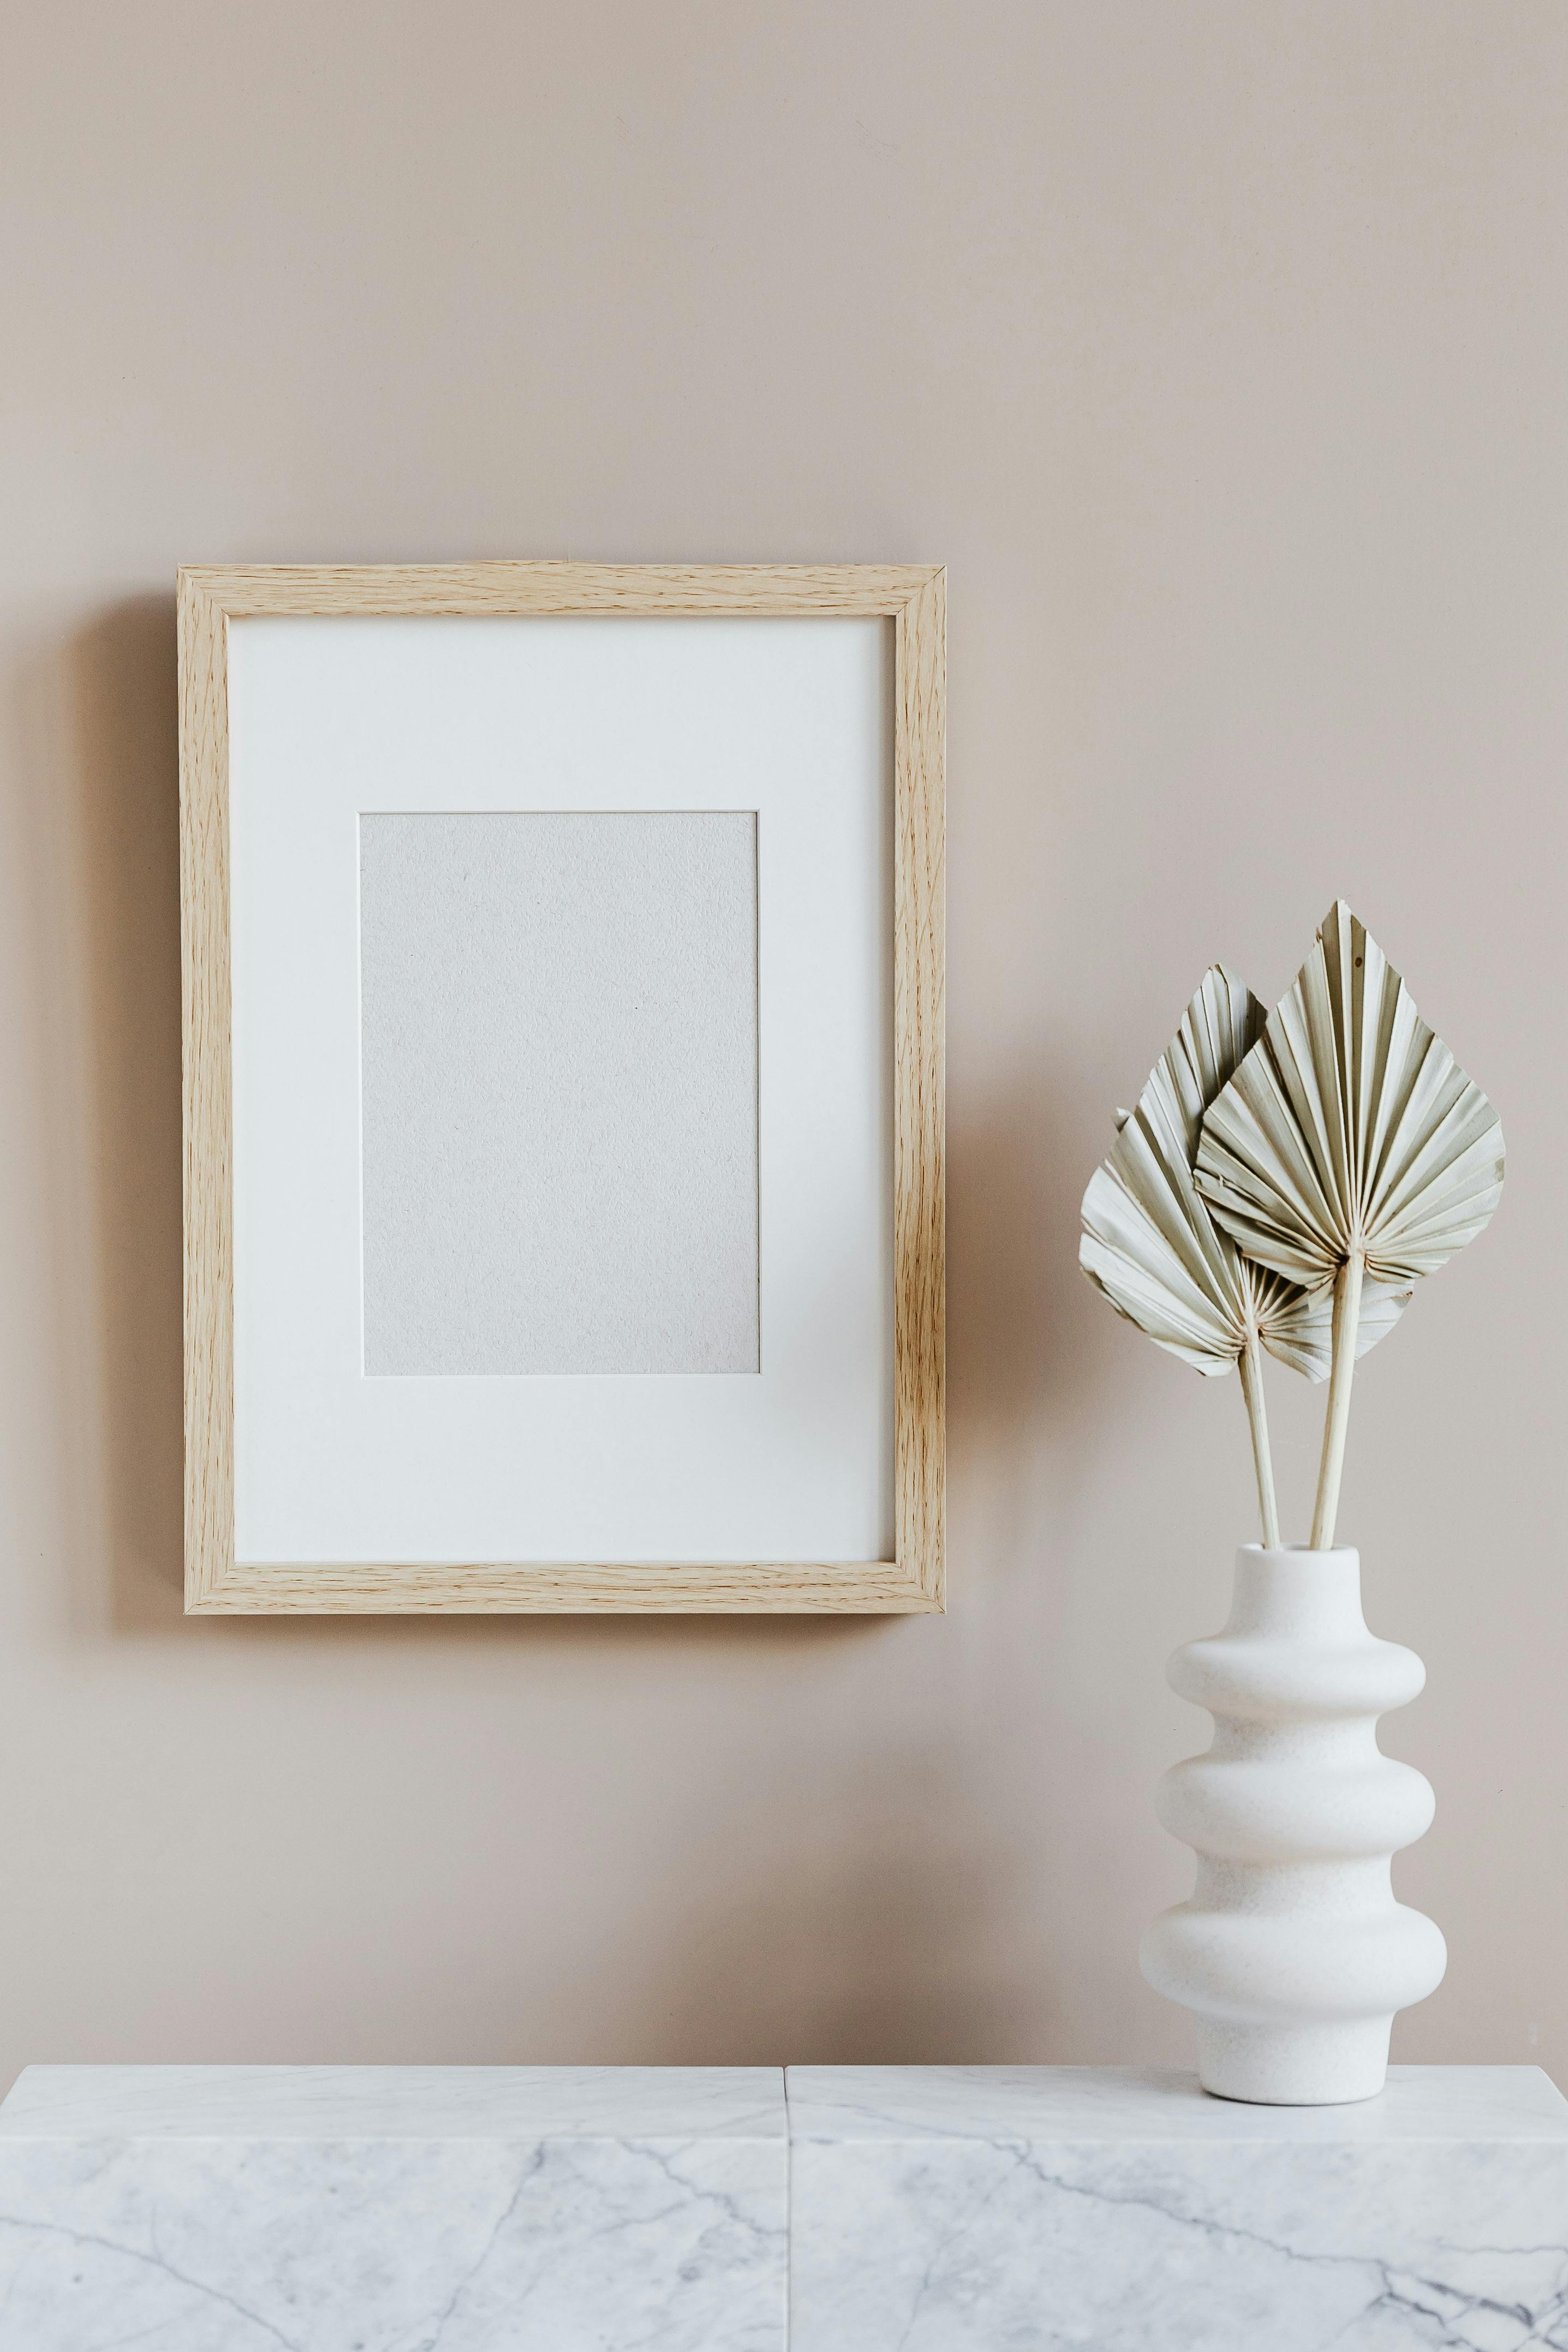 Decorative Paper Frame Stock Photo, Picture and Royalty Free Image. Image  5521651.